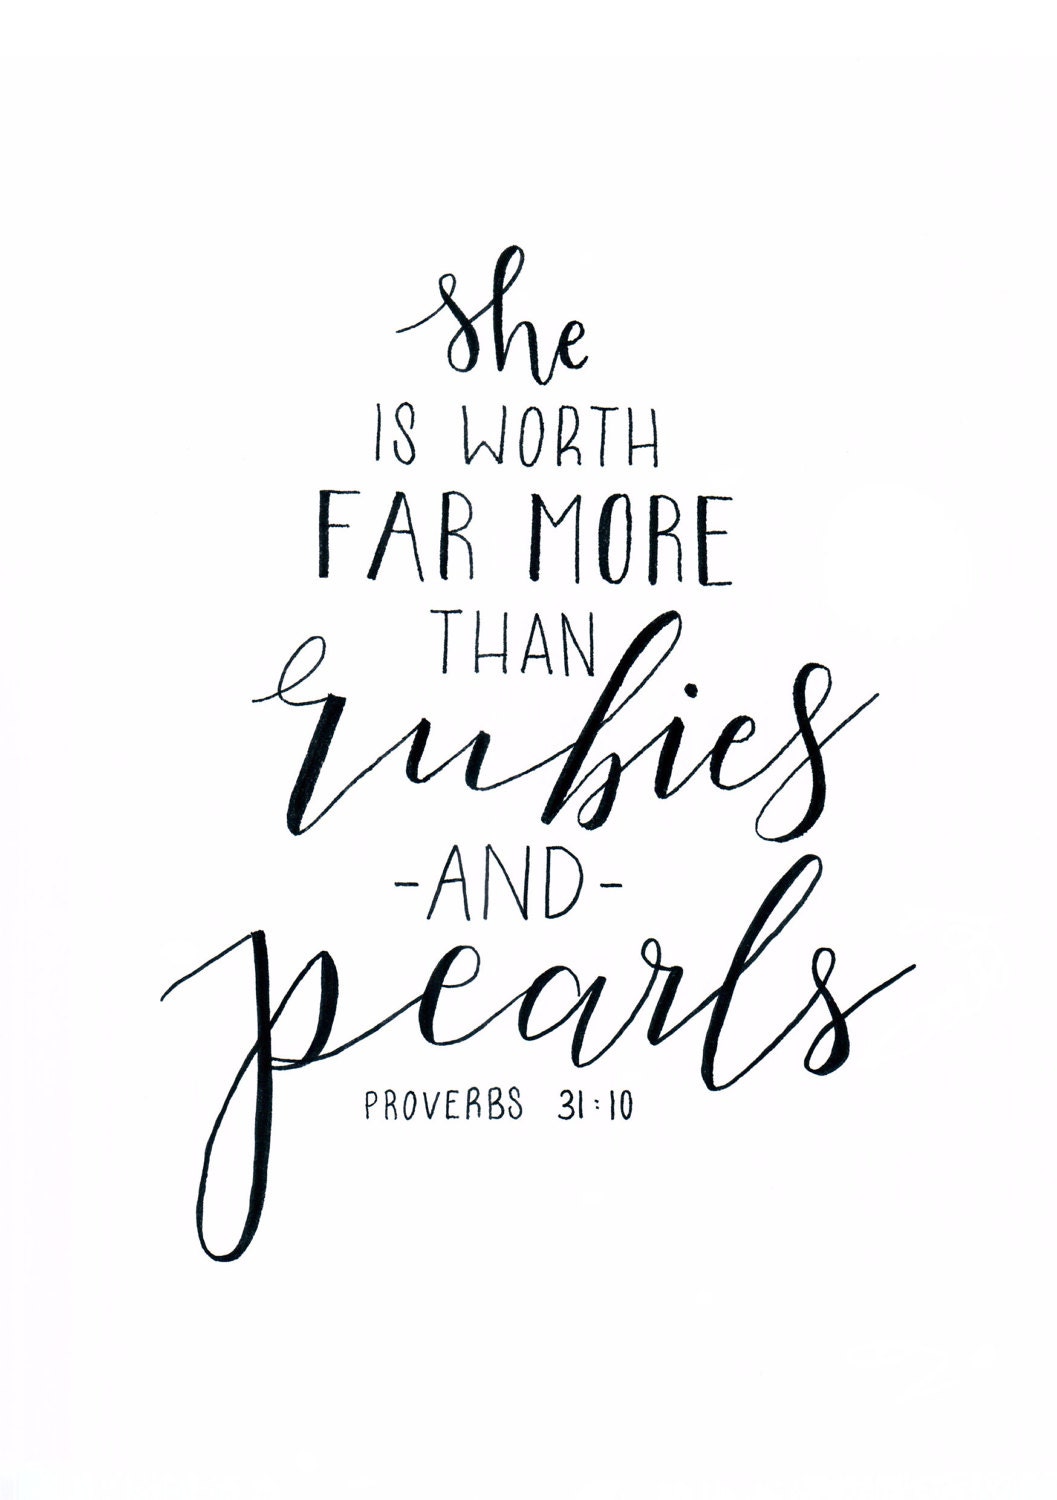 She is worth far more than rubies and pearls Proverbs 31